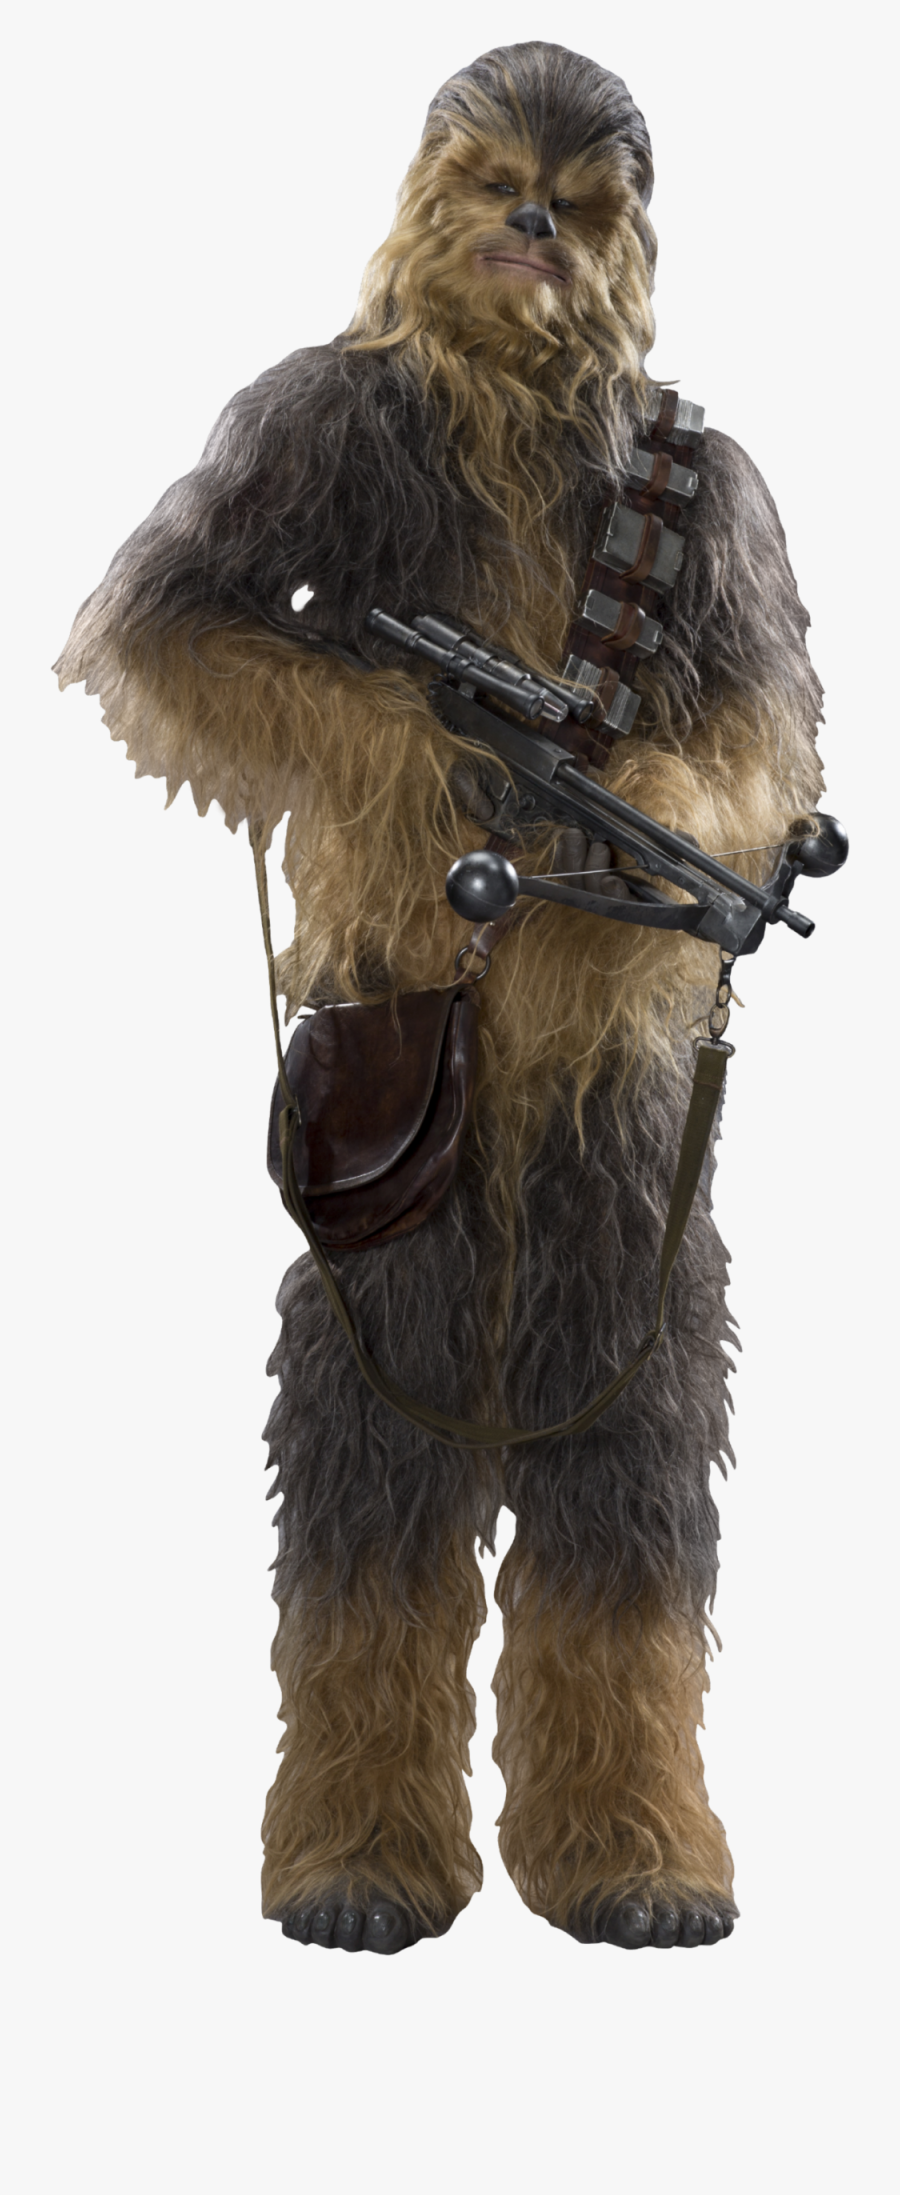 Download Chewbacca Png Clipart 140 - Star Wars Chewbacca Png, Transparent Clipart